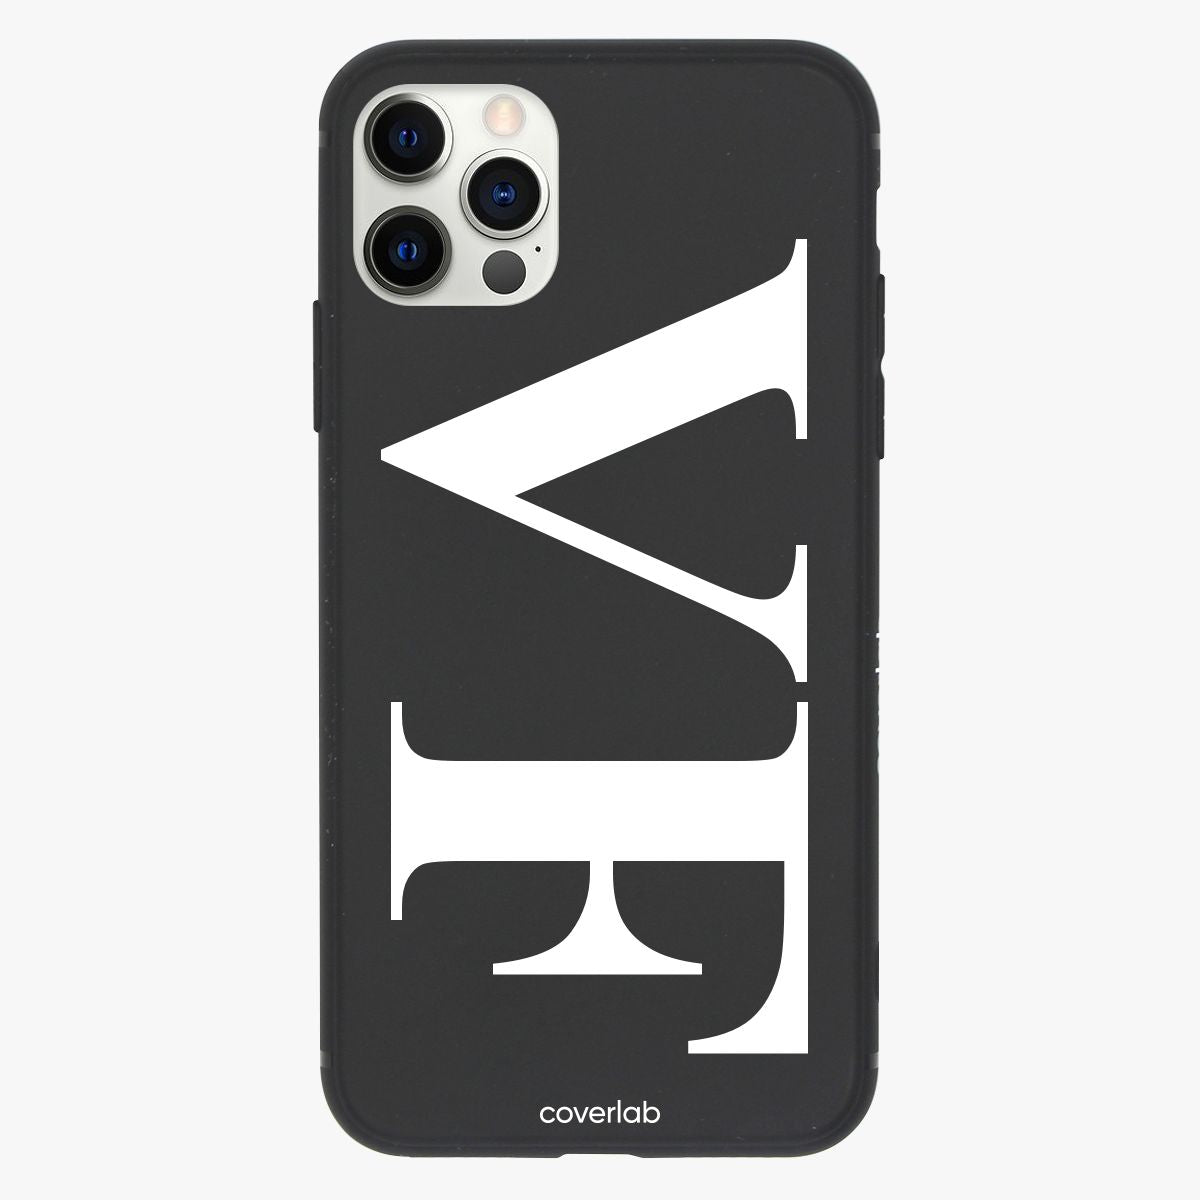 Personalised iPhone 11 Cases & Covers